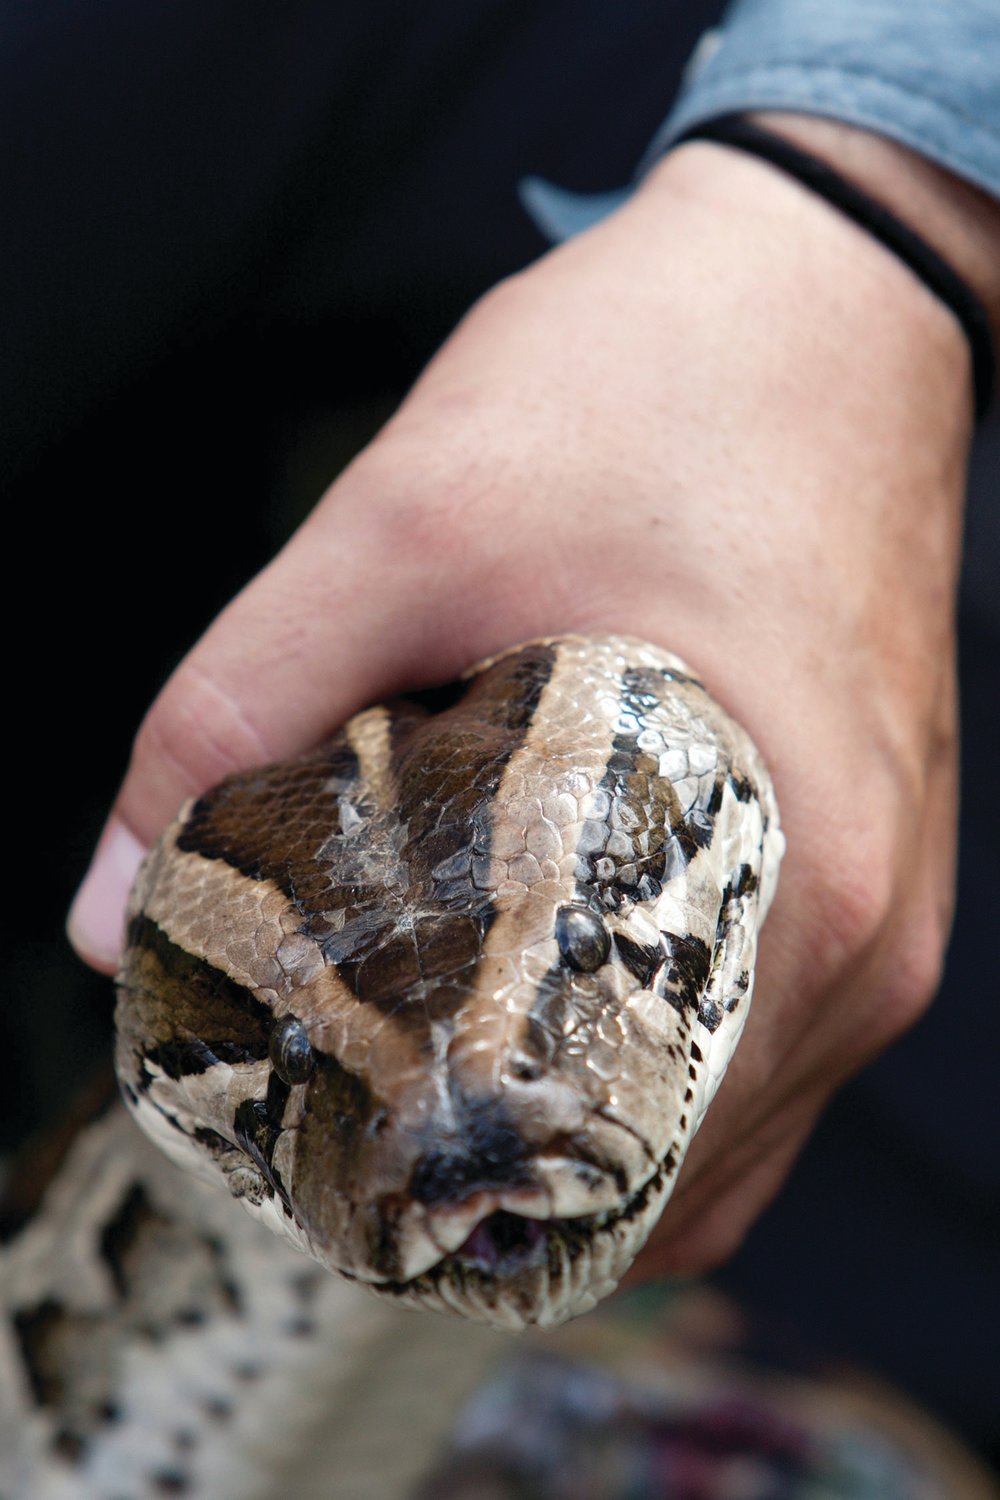 The Burmese pythons are responsible for severe declines of local mammal populations in the Everglades.